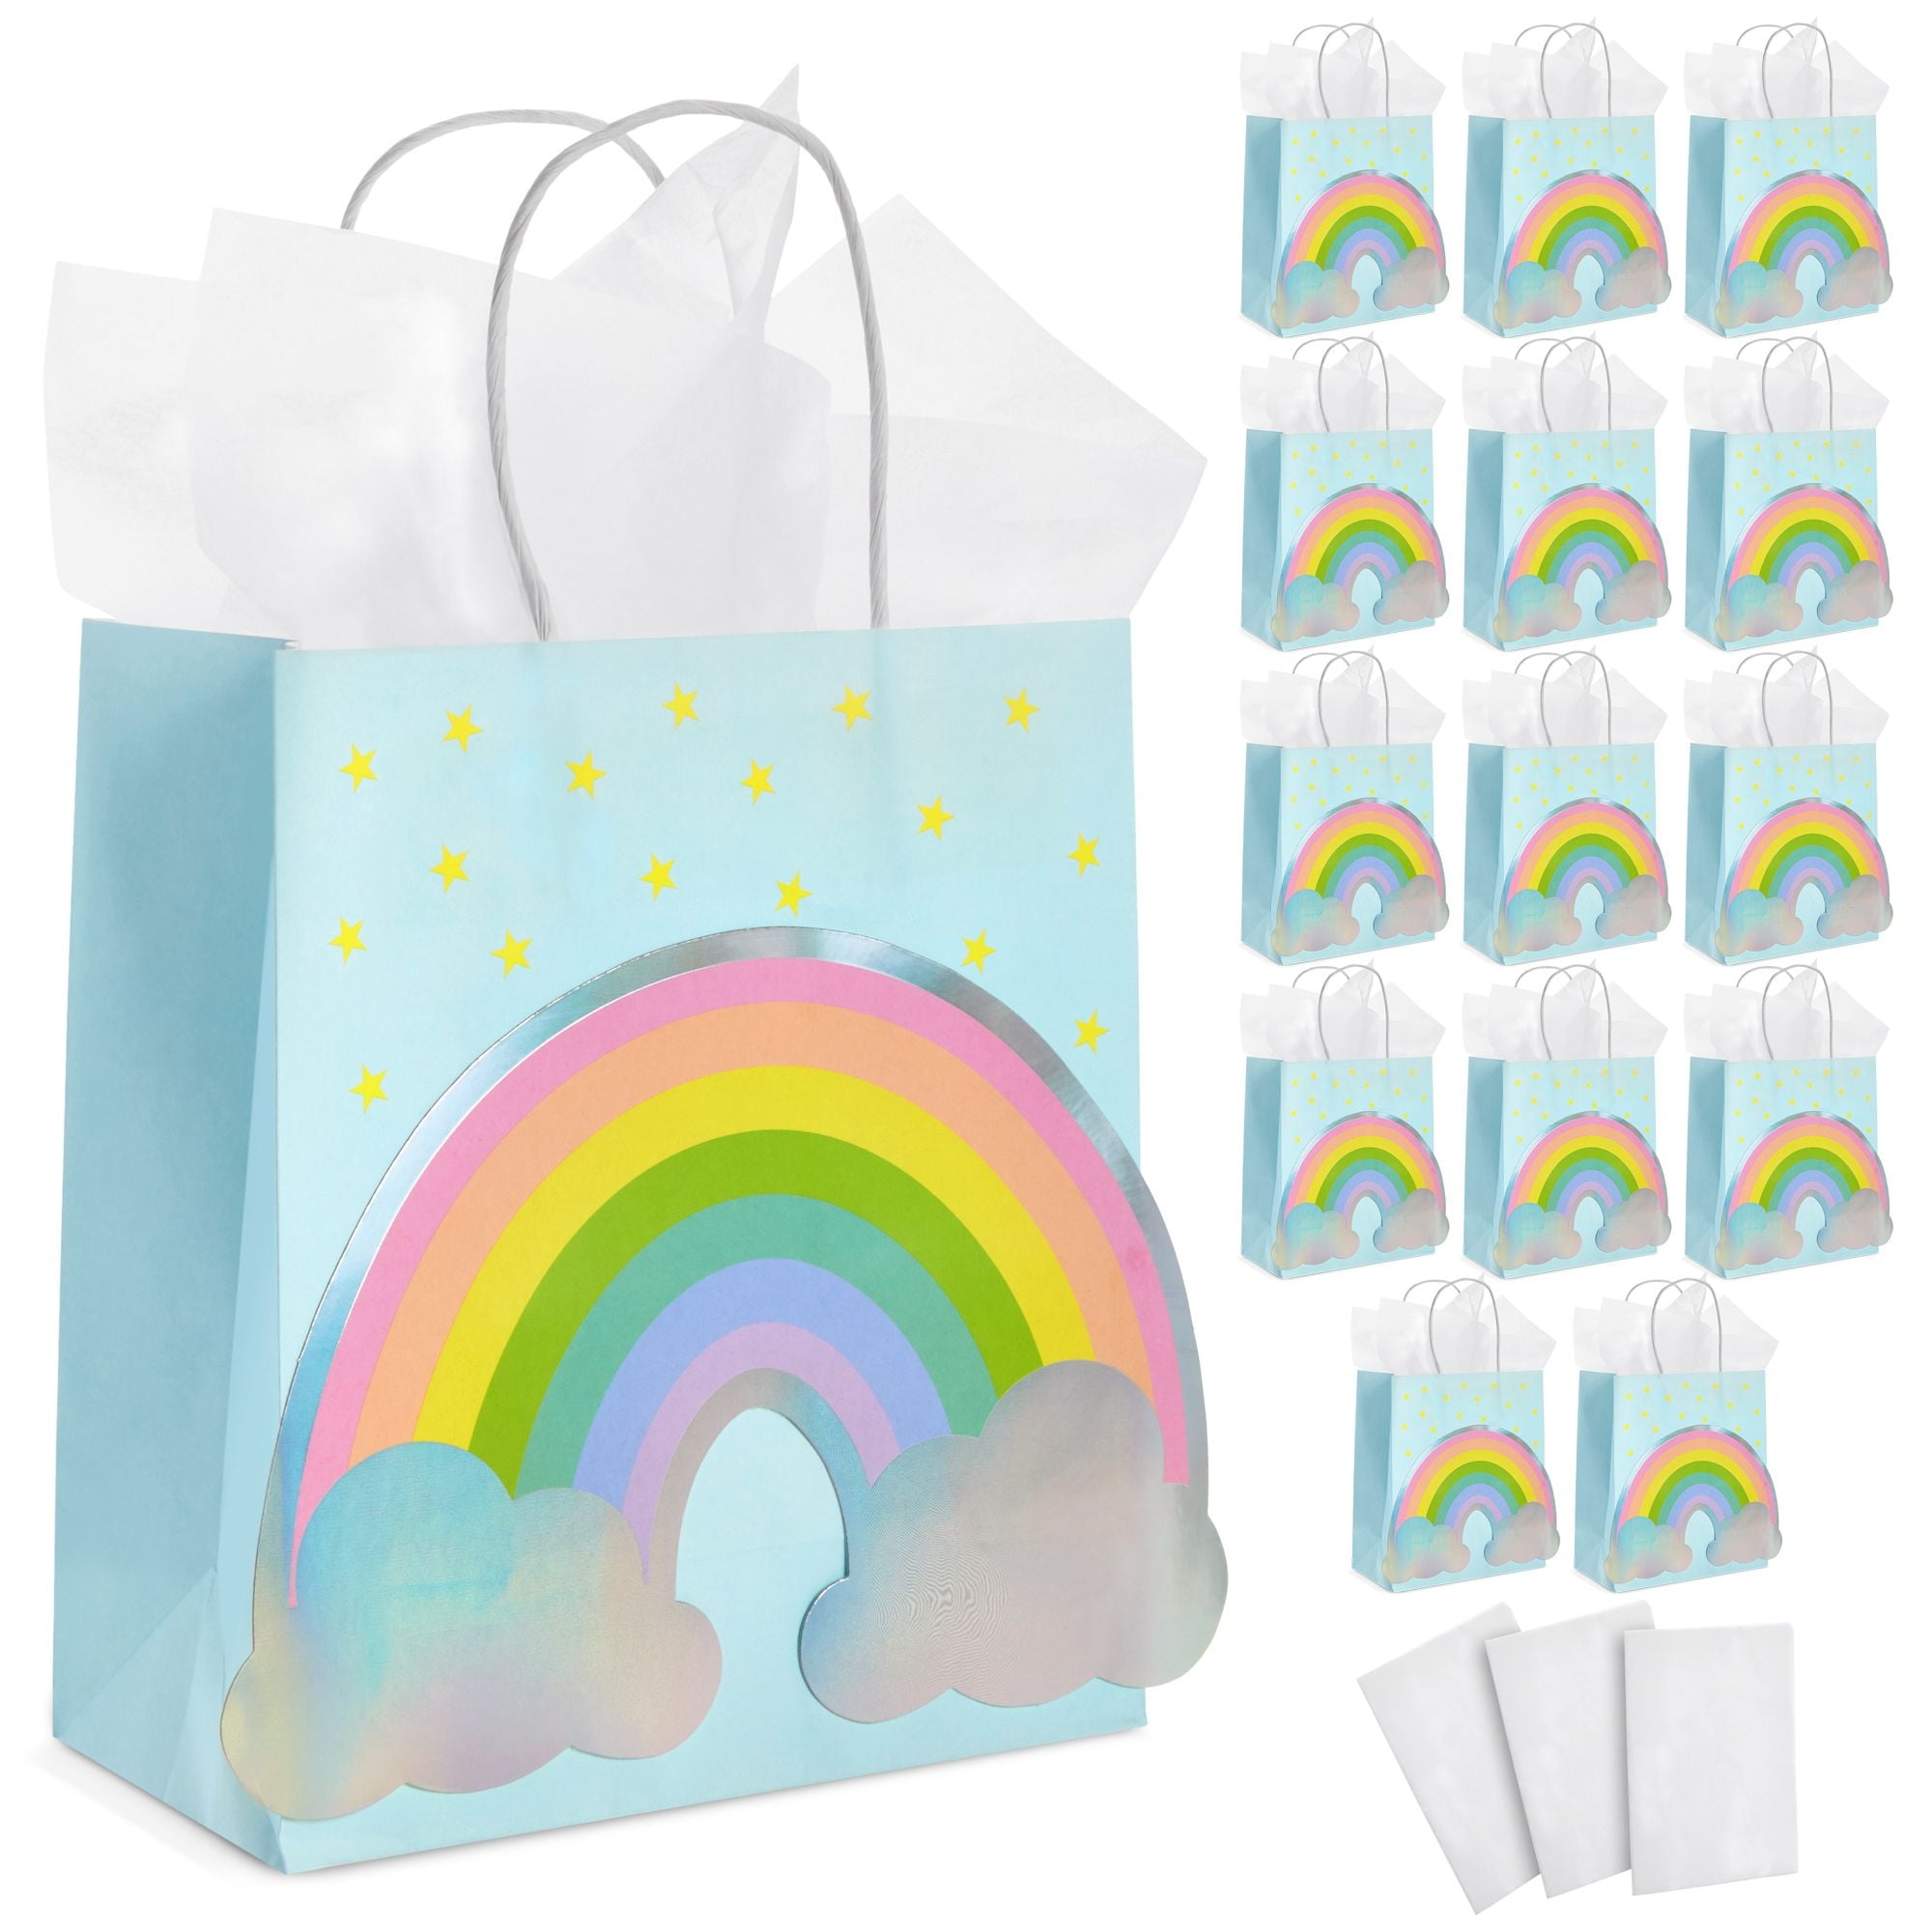 GITMIWS 32 Pcs Rainbow Party Gift Bags with Tissue - 8.7 Small Solid Color Kraft Paper Bags with Handles, Colorful Rainbow Party Favor Paper Goodie